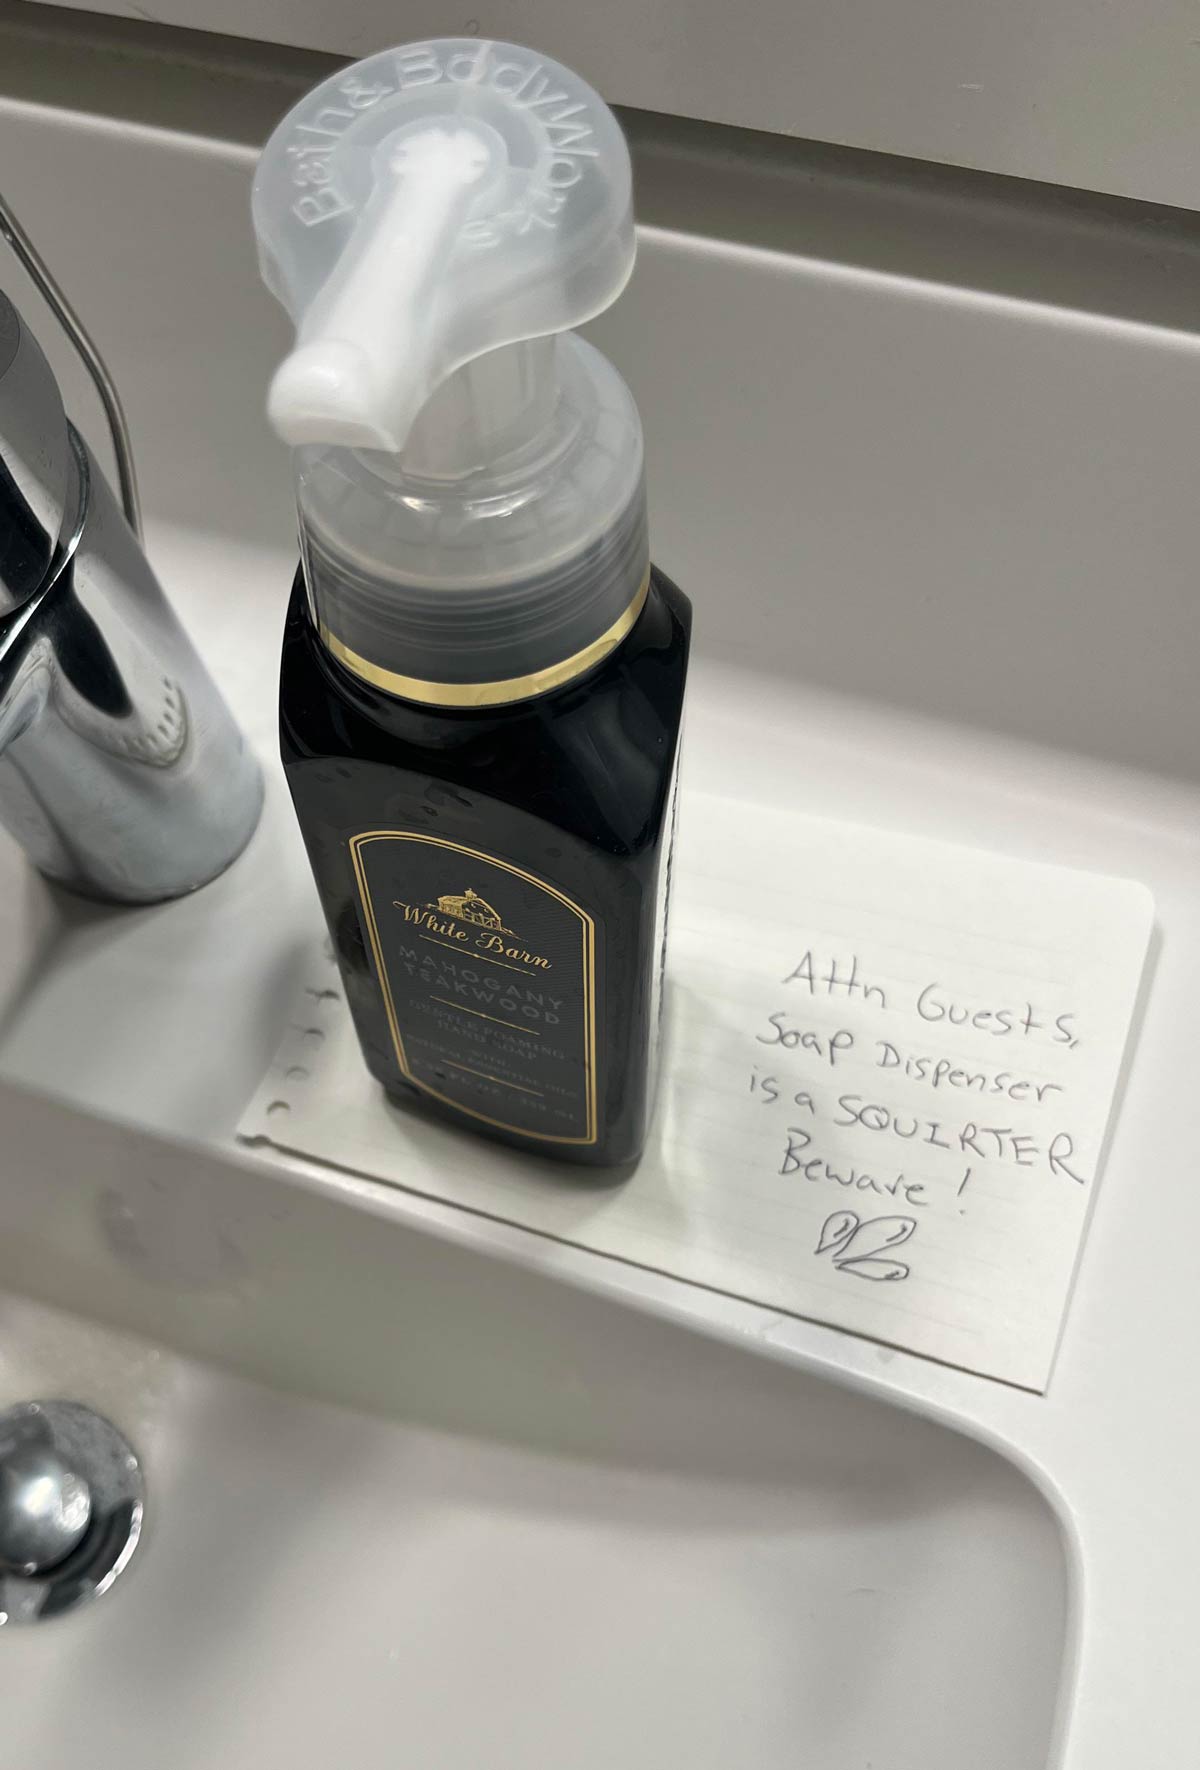 Friend’s warning about their hand soap dispenser